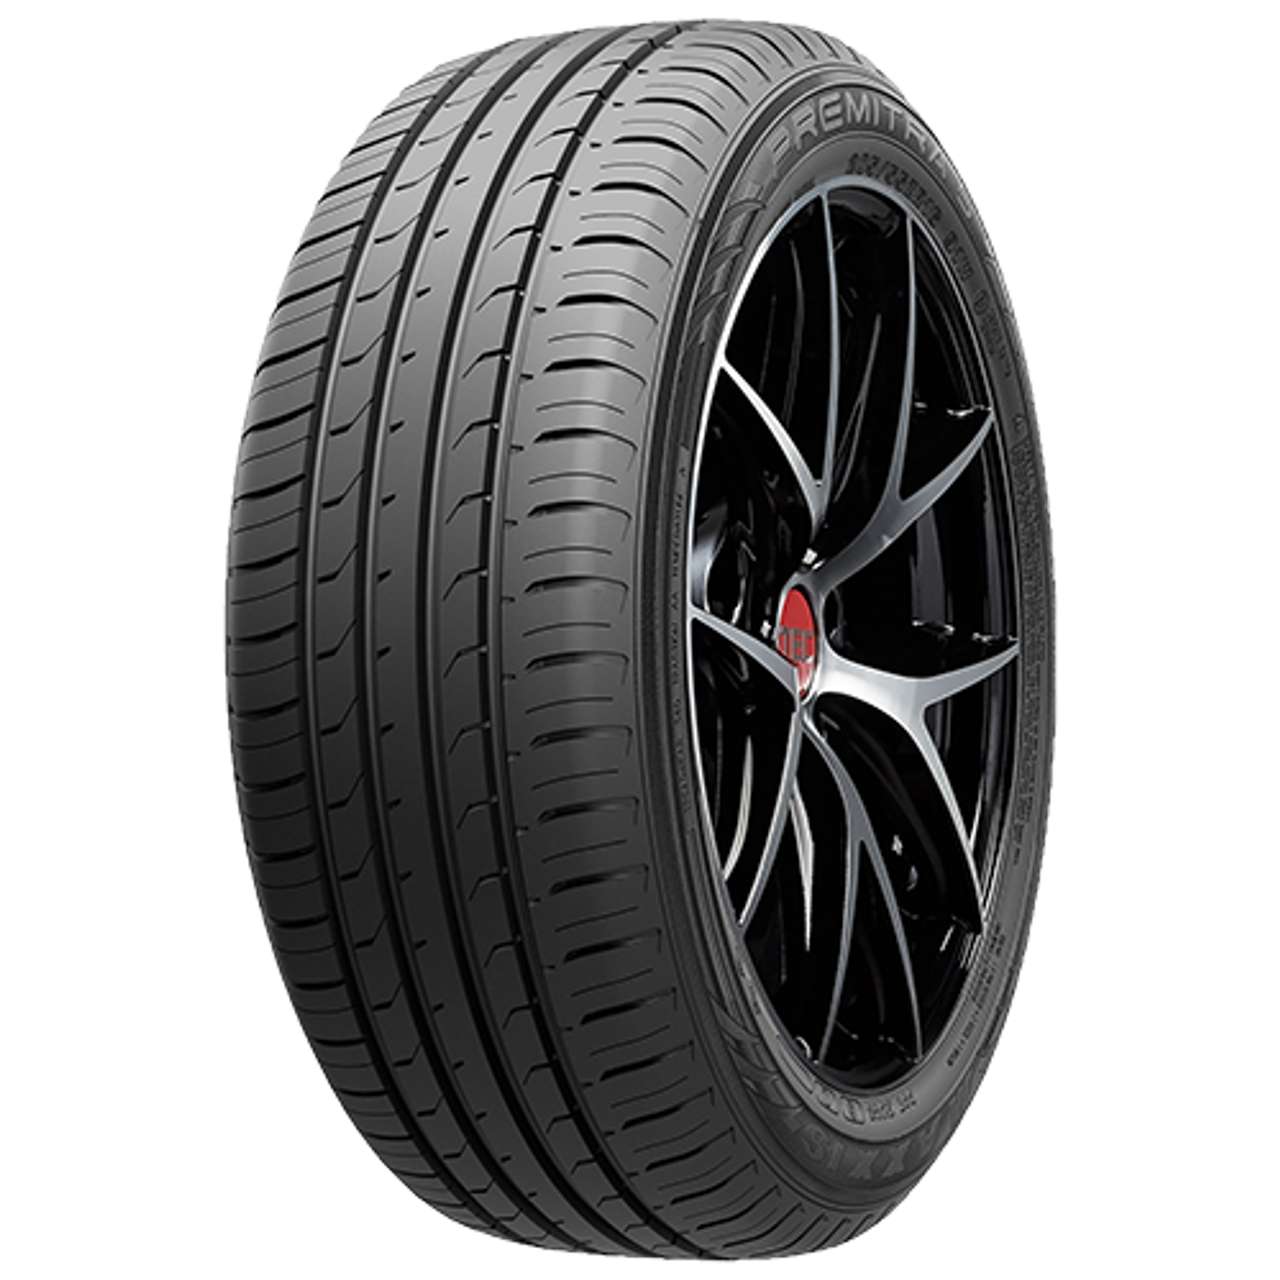 MAXXIS PREMITRA HP5 205/60R15 91H BSW